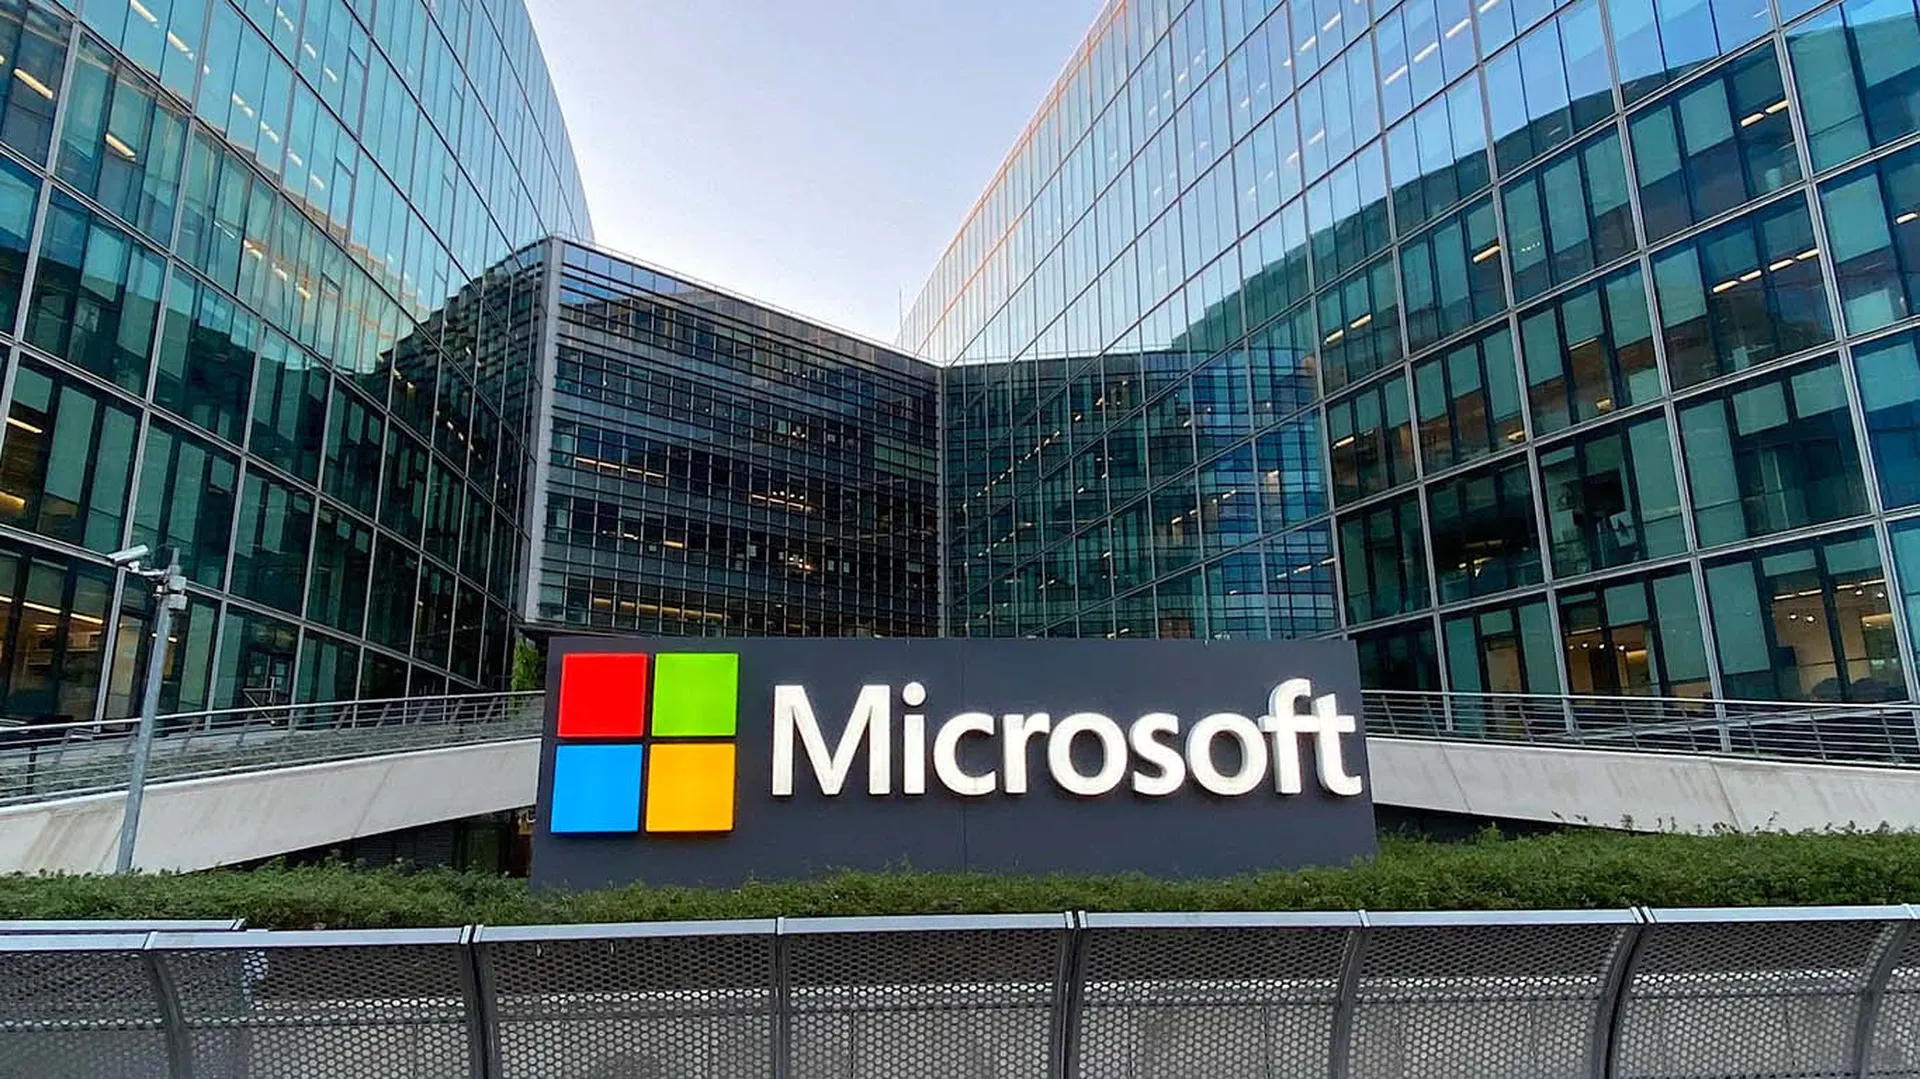 A sign with the red, green, blue and yellow Microsoft logo is seen outside a building